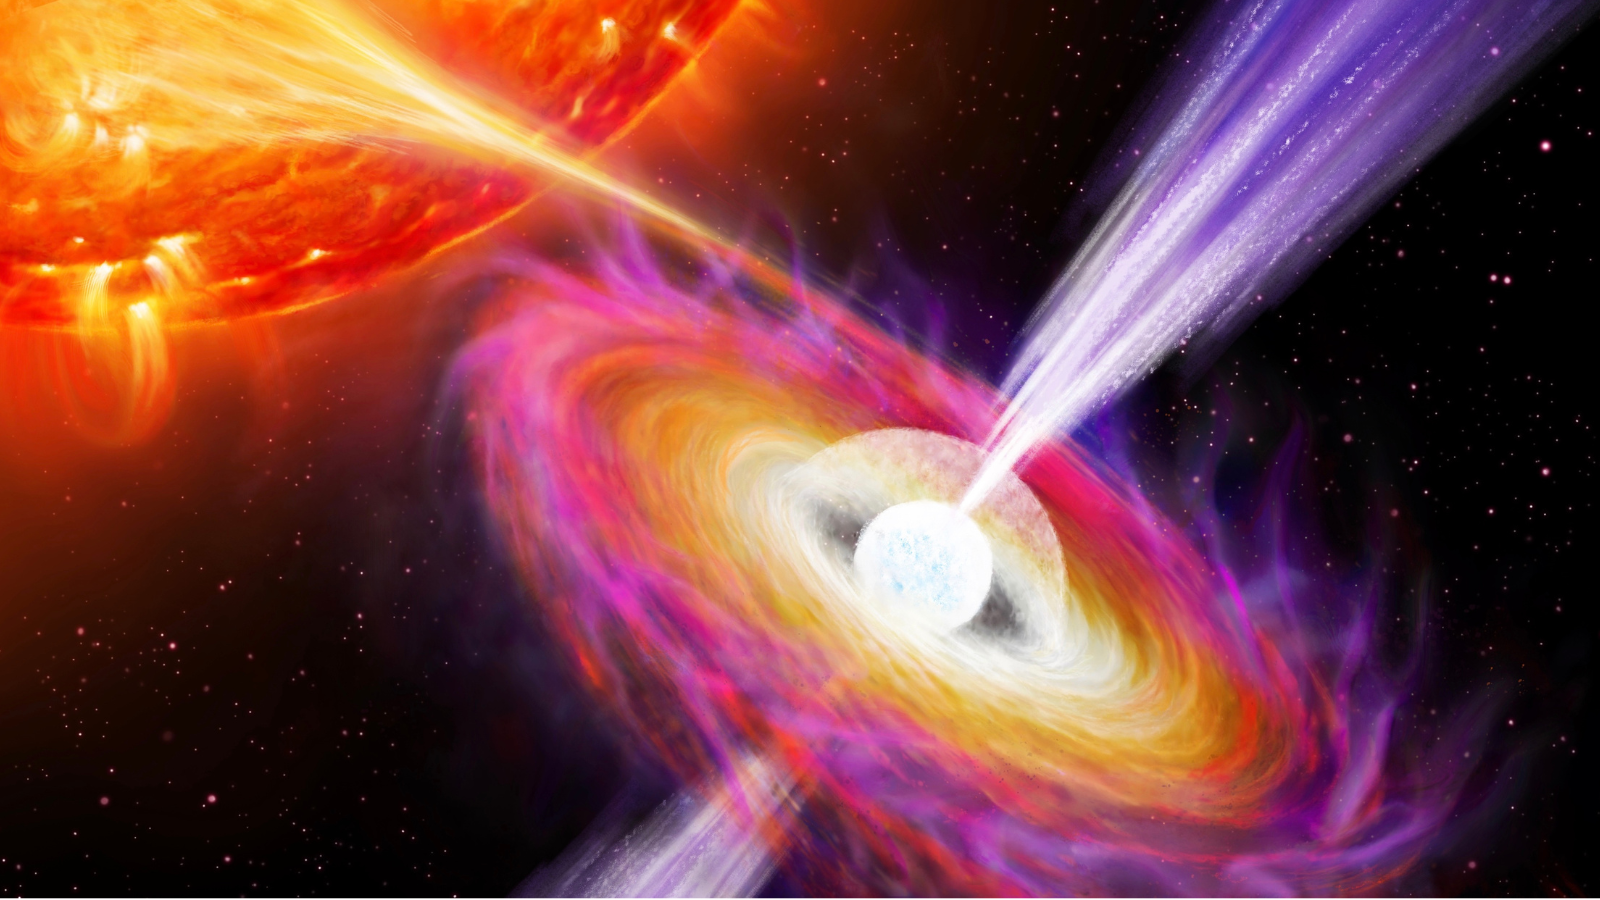 ‘Vampire’ neutron star blasts are related to jets traveling at near-light speeds Space